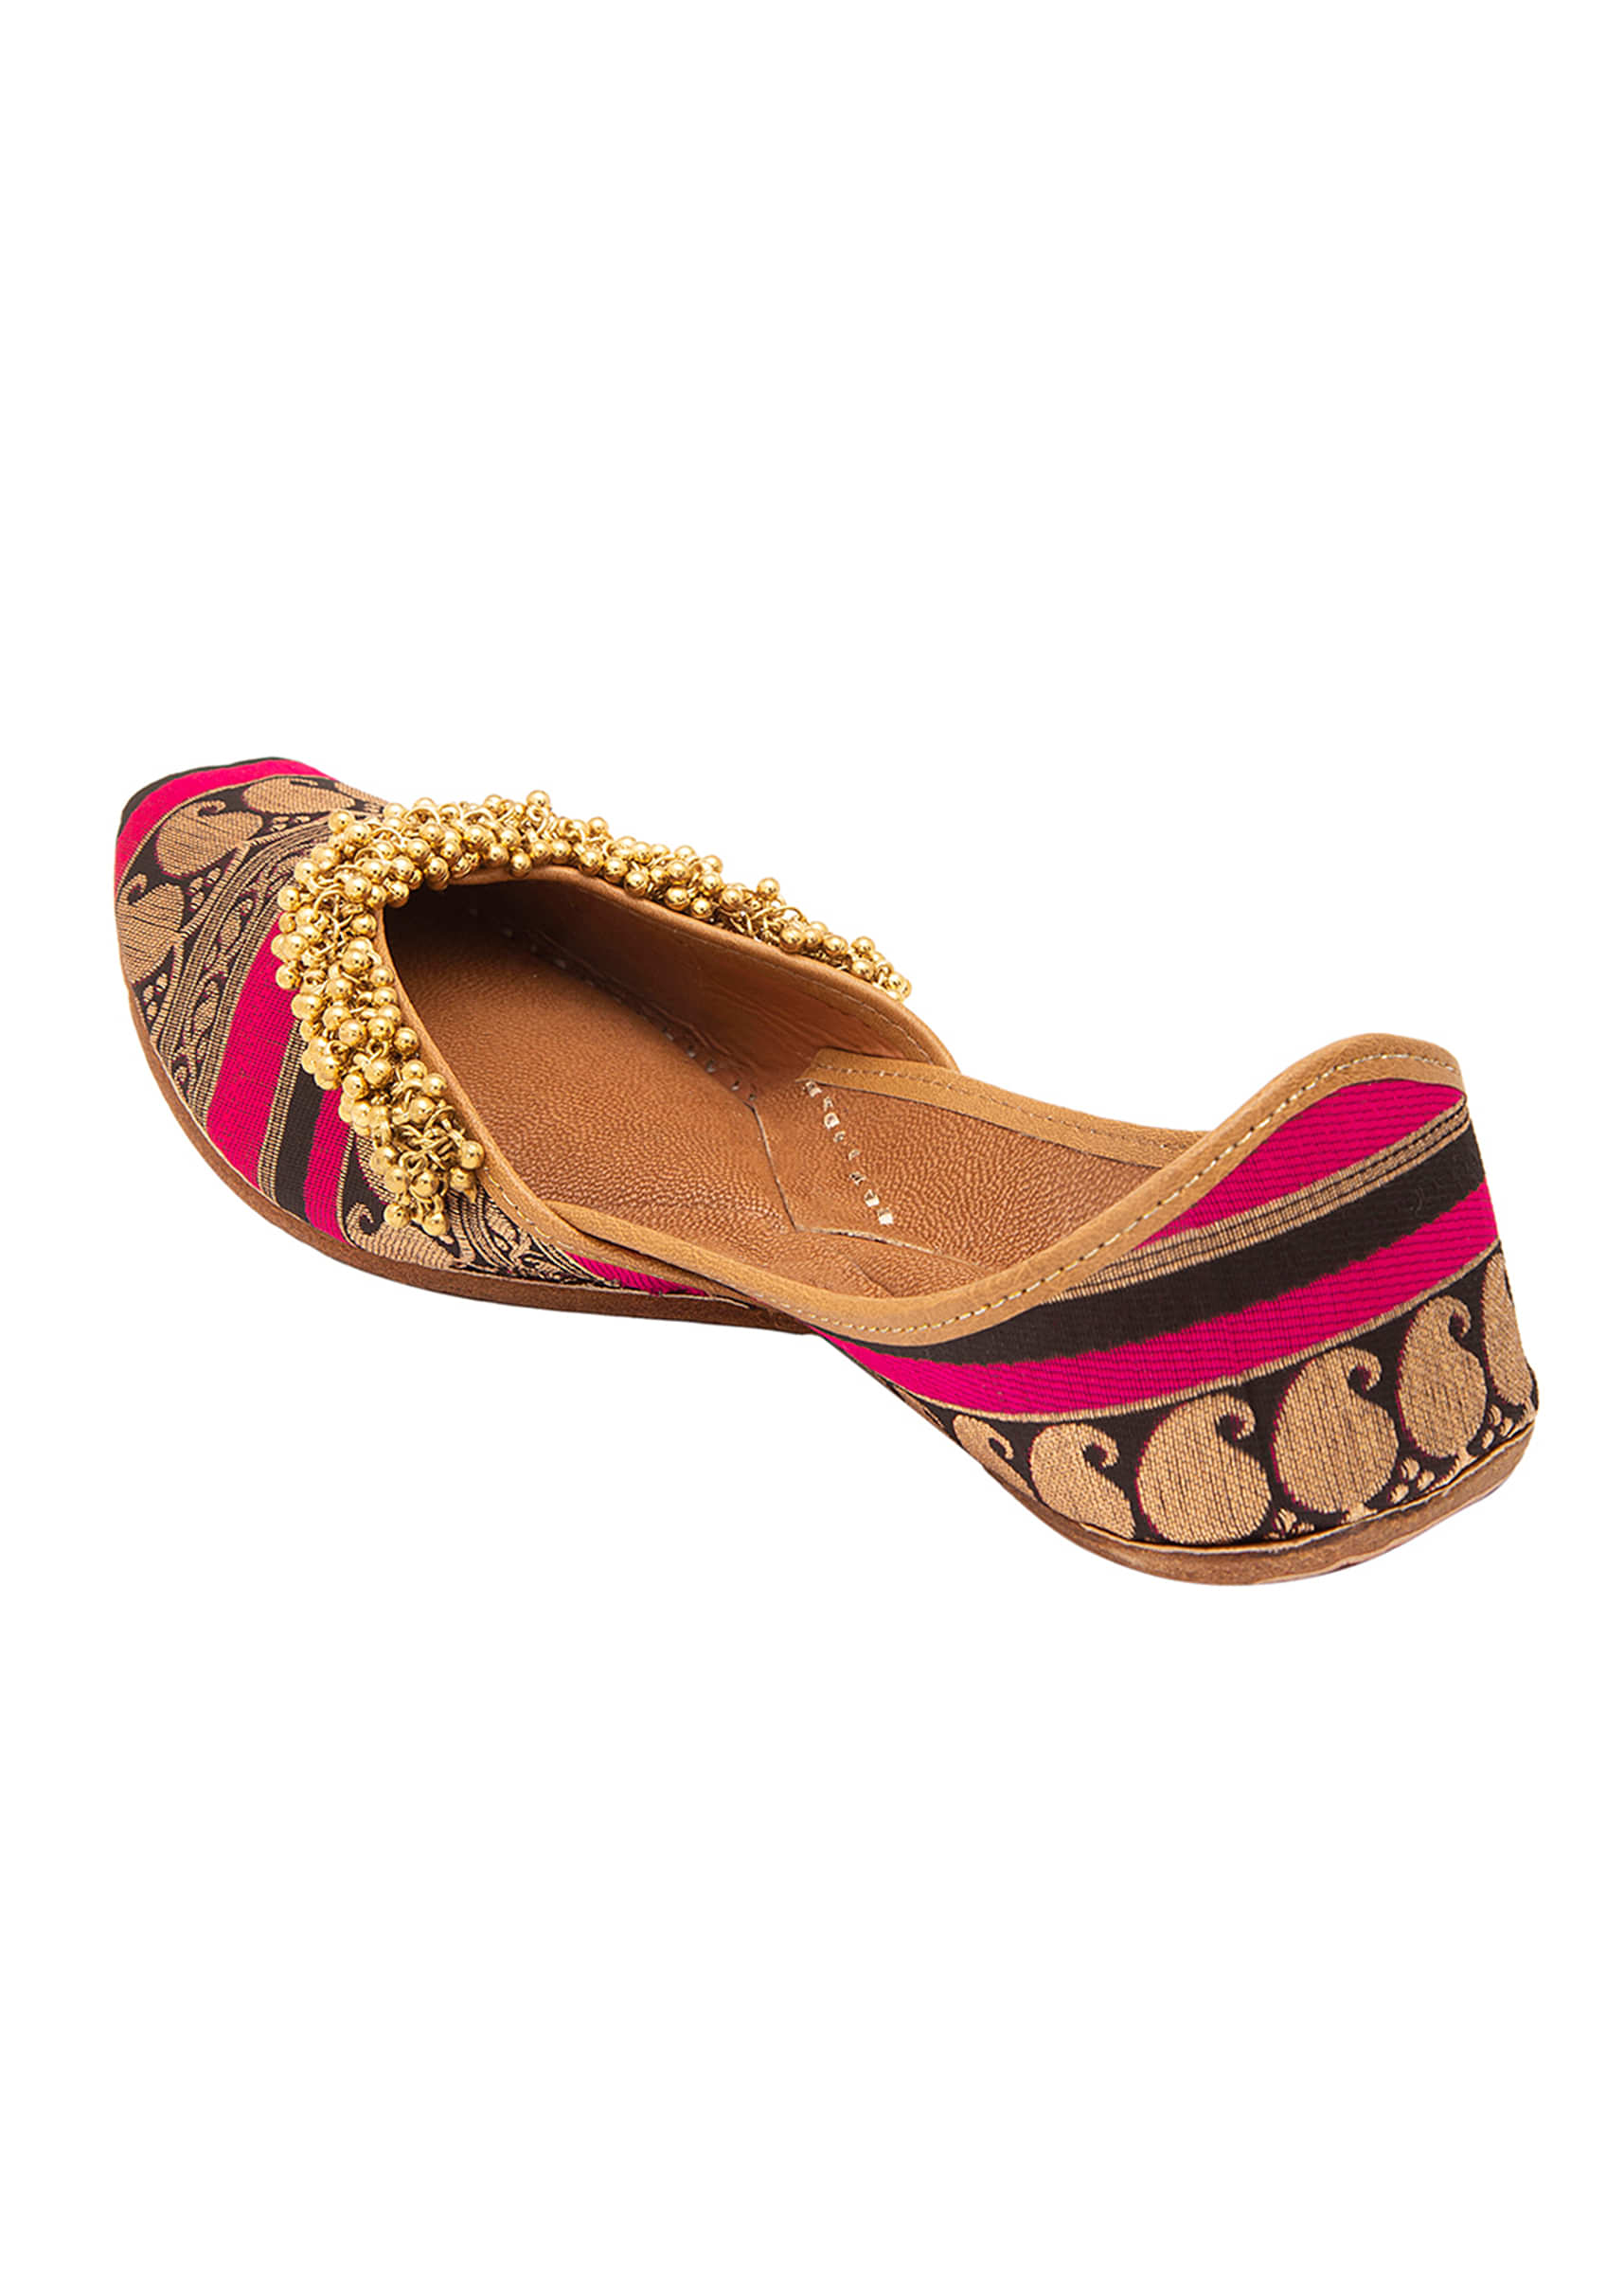 Multicolour Butti Print Juttis In Silk With Ghungroo Embellishment And Stitch Line Detail